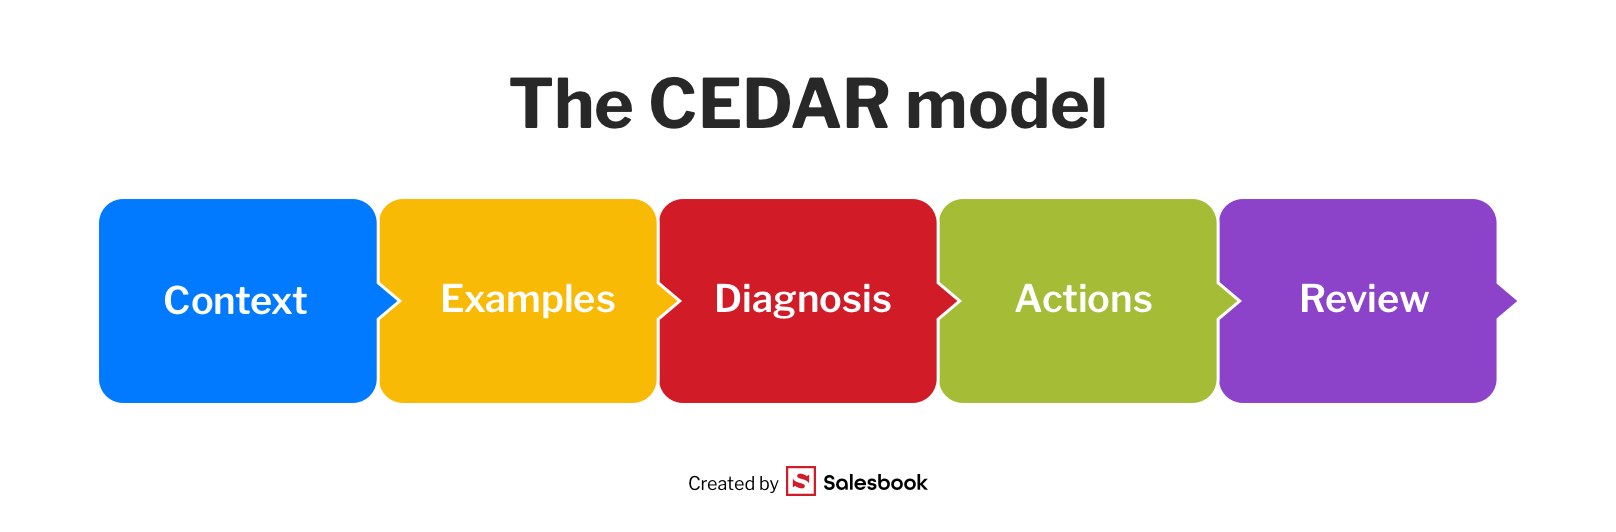 The CEDAR model and its elements.